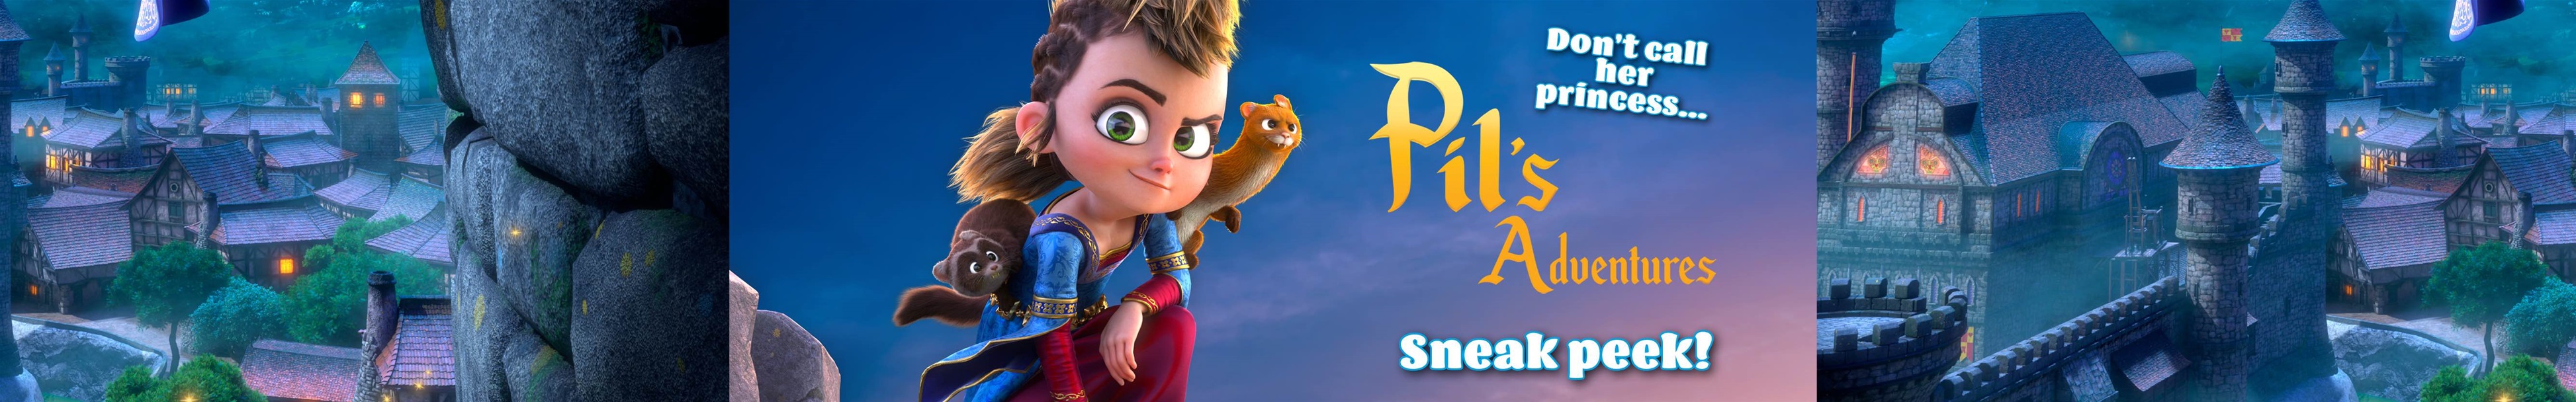 Let's go! Sneak a peek of the cool new movie Pil's Adventures!